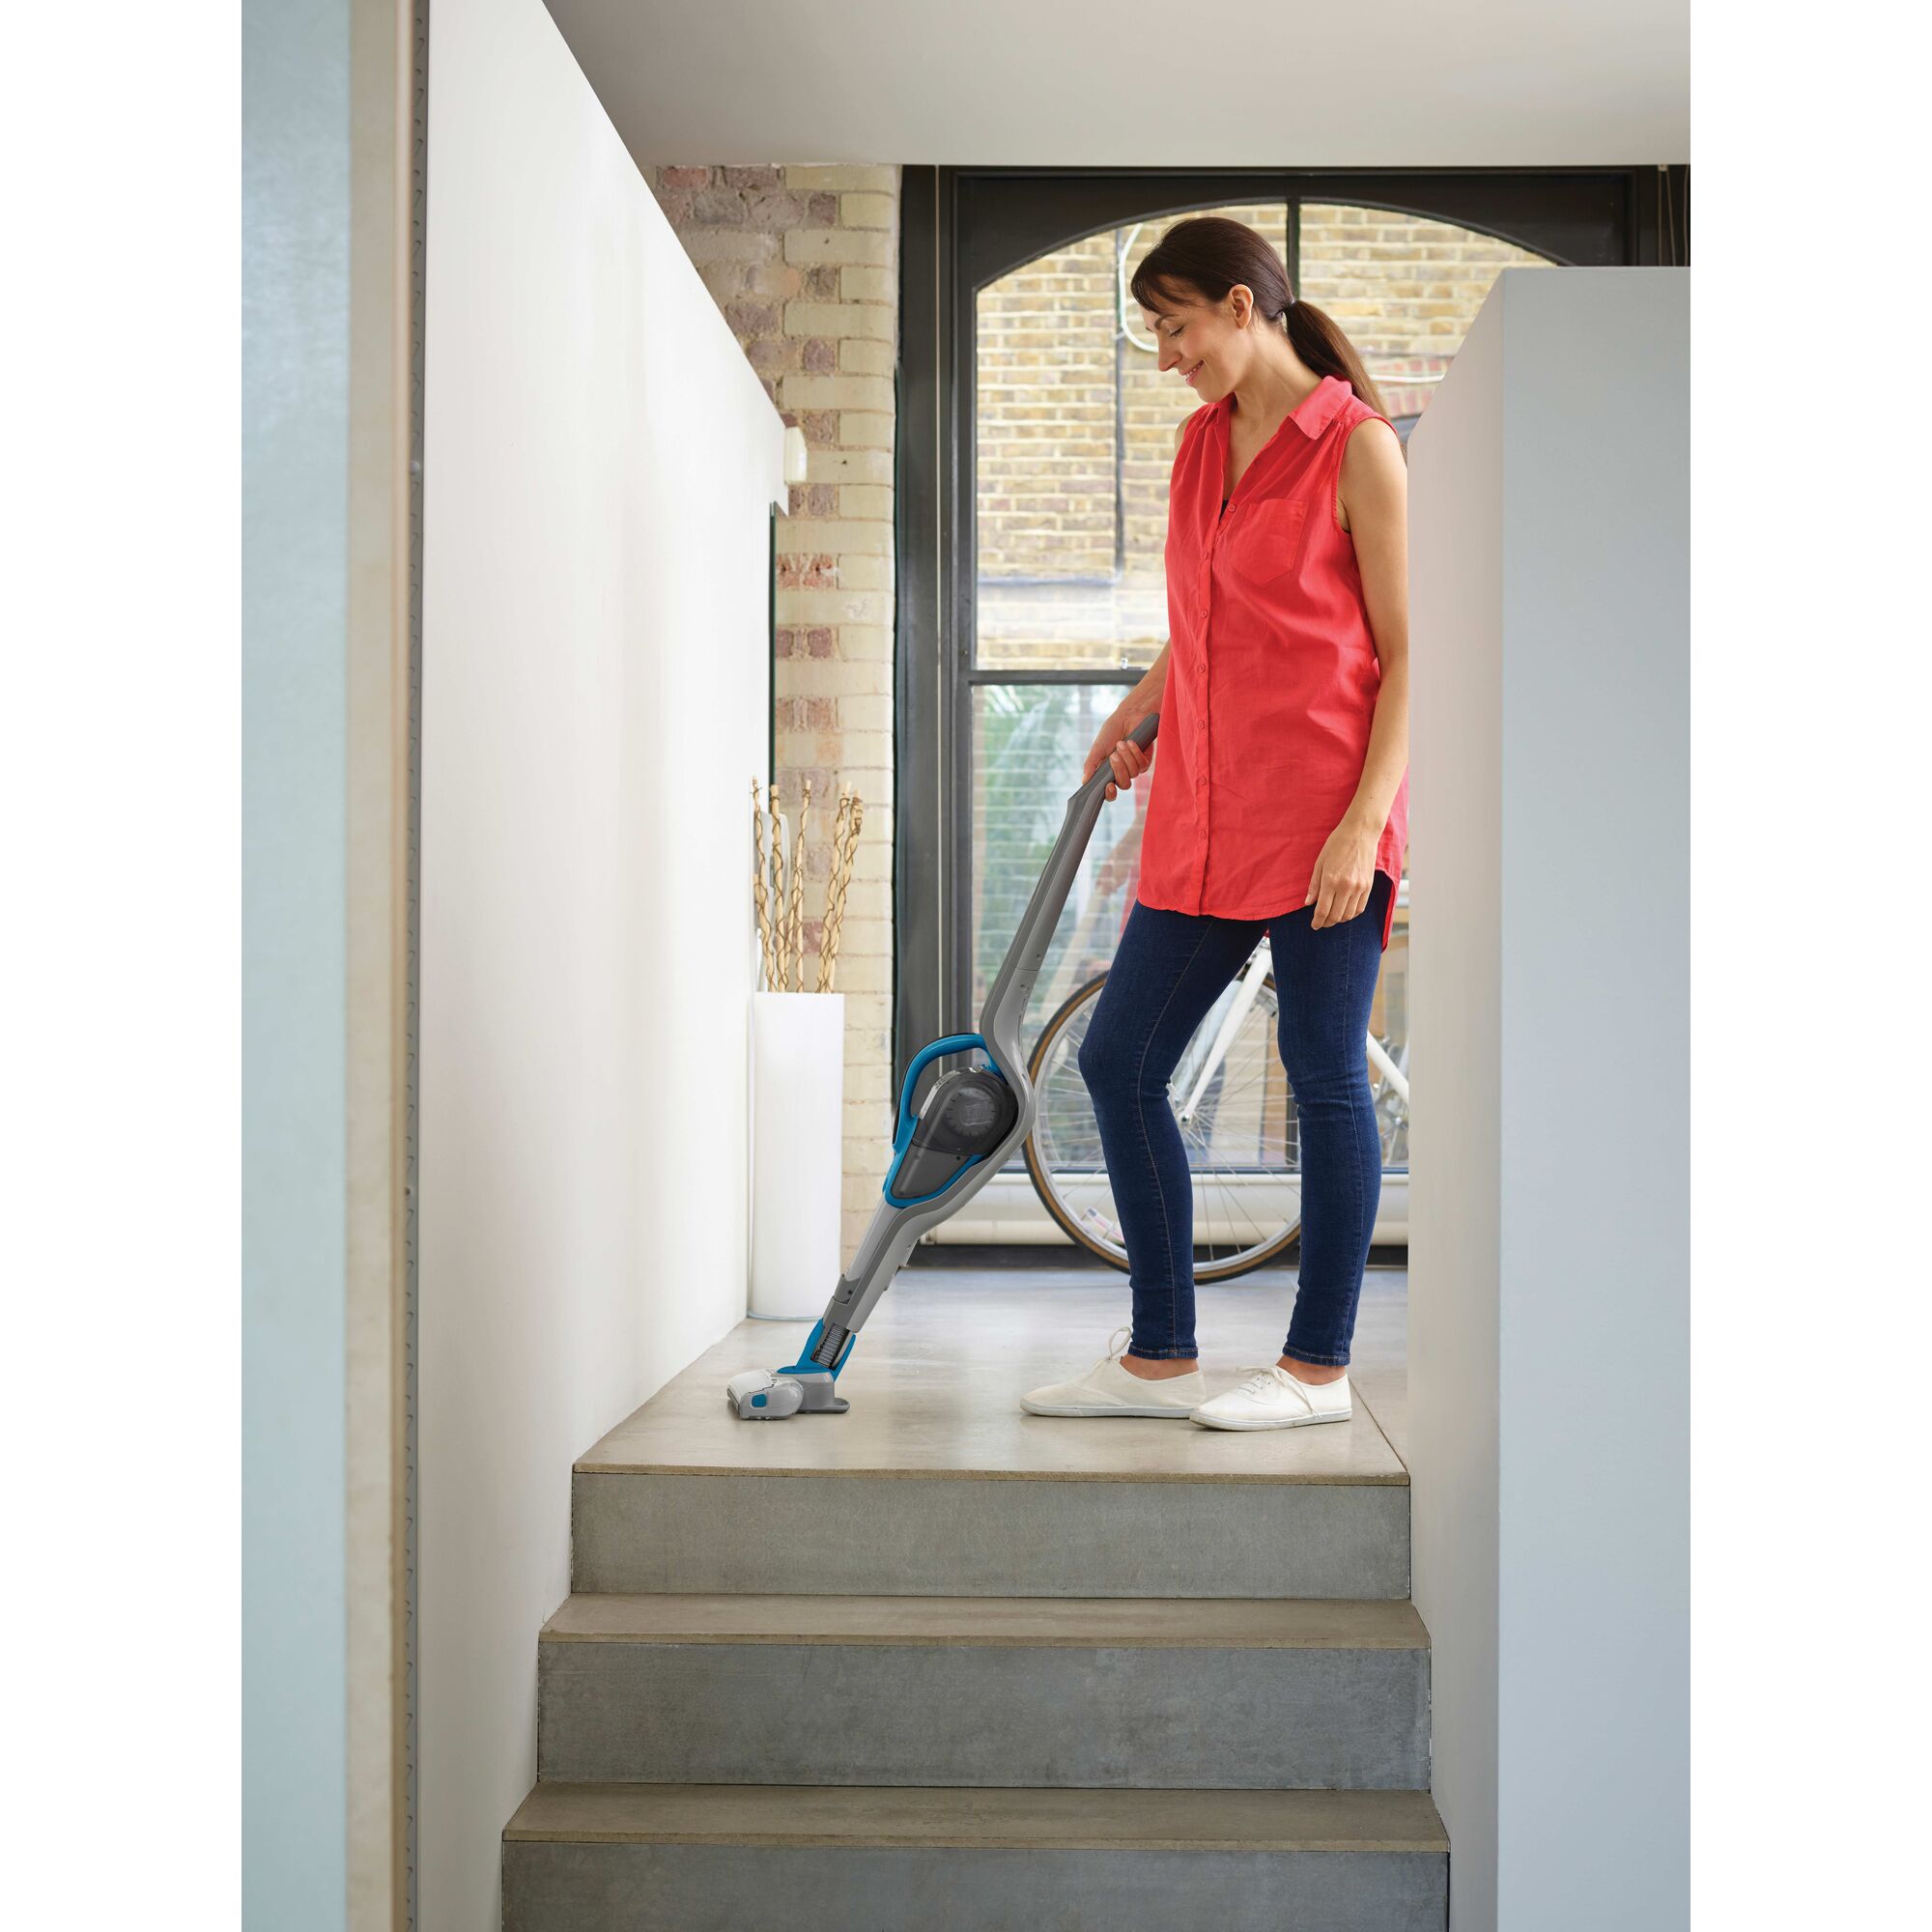 Cordless Lithium 2 in 1 Stick Vacuum being used for cleaning floor by person.